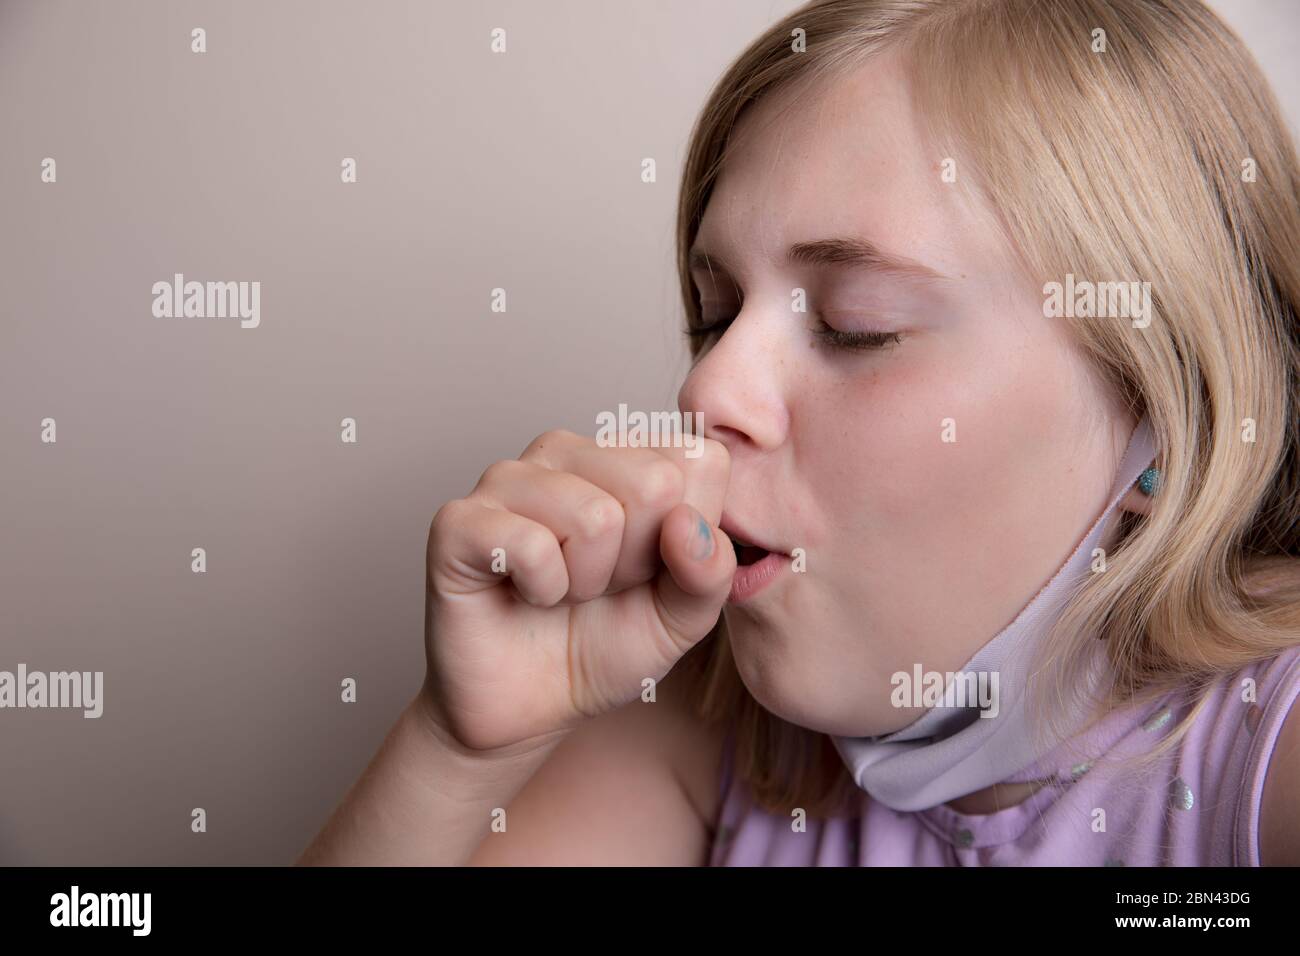 young girl uncovers her face to cough Stock Photo